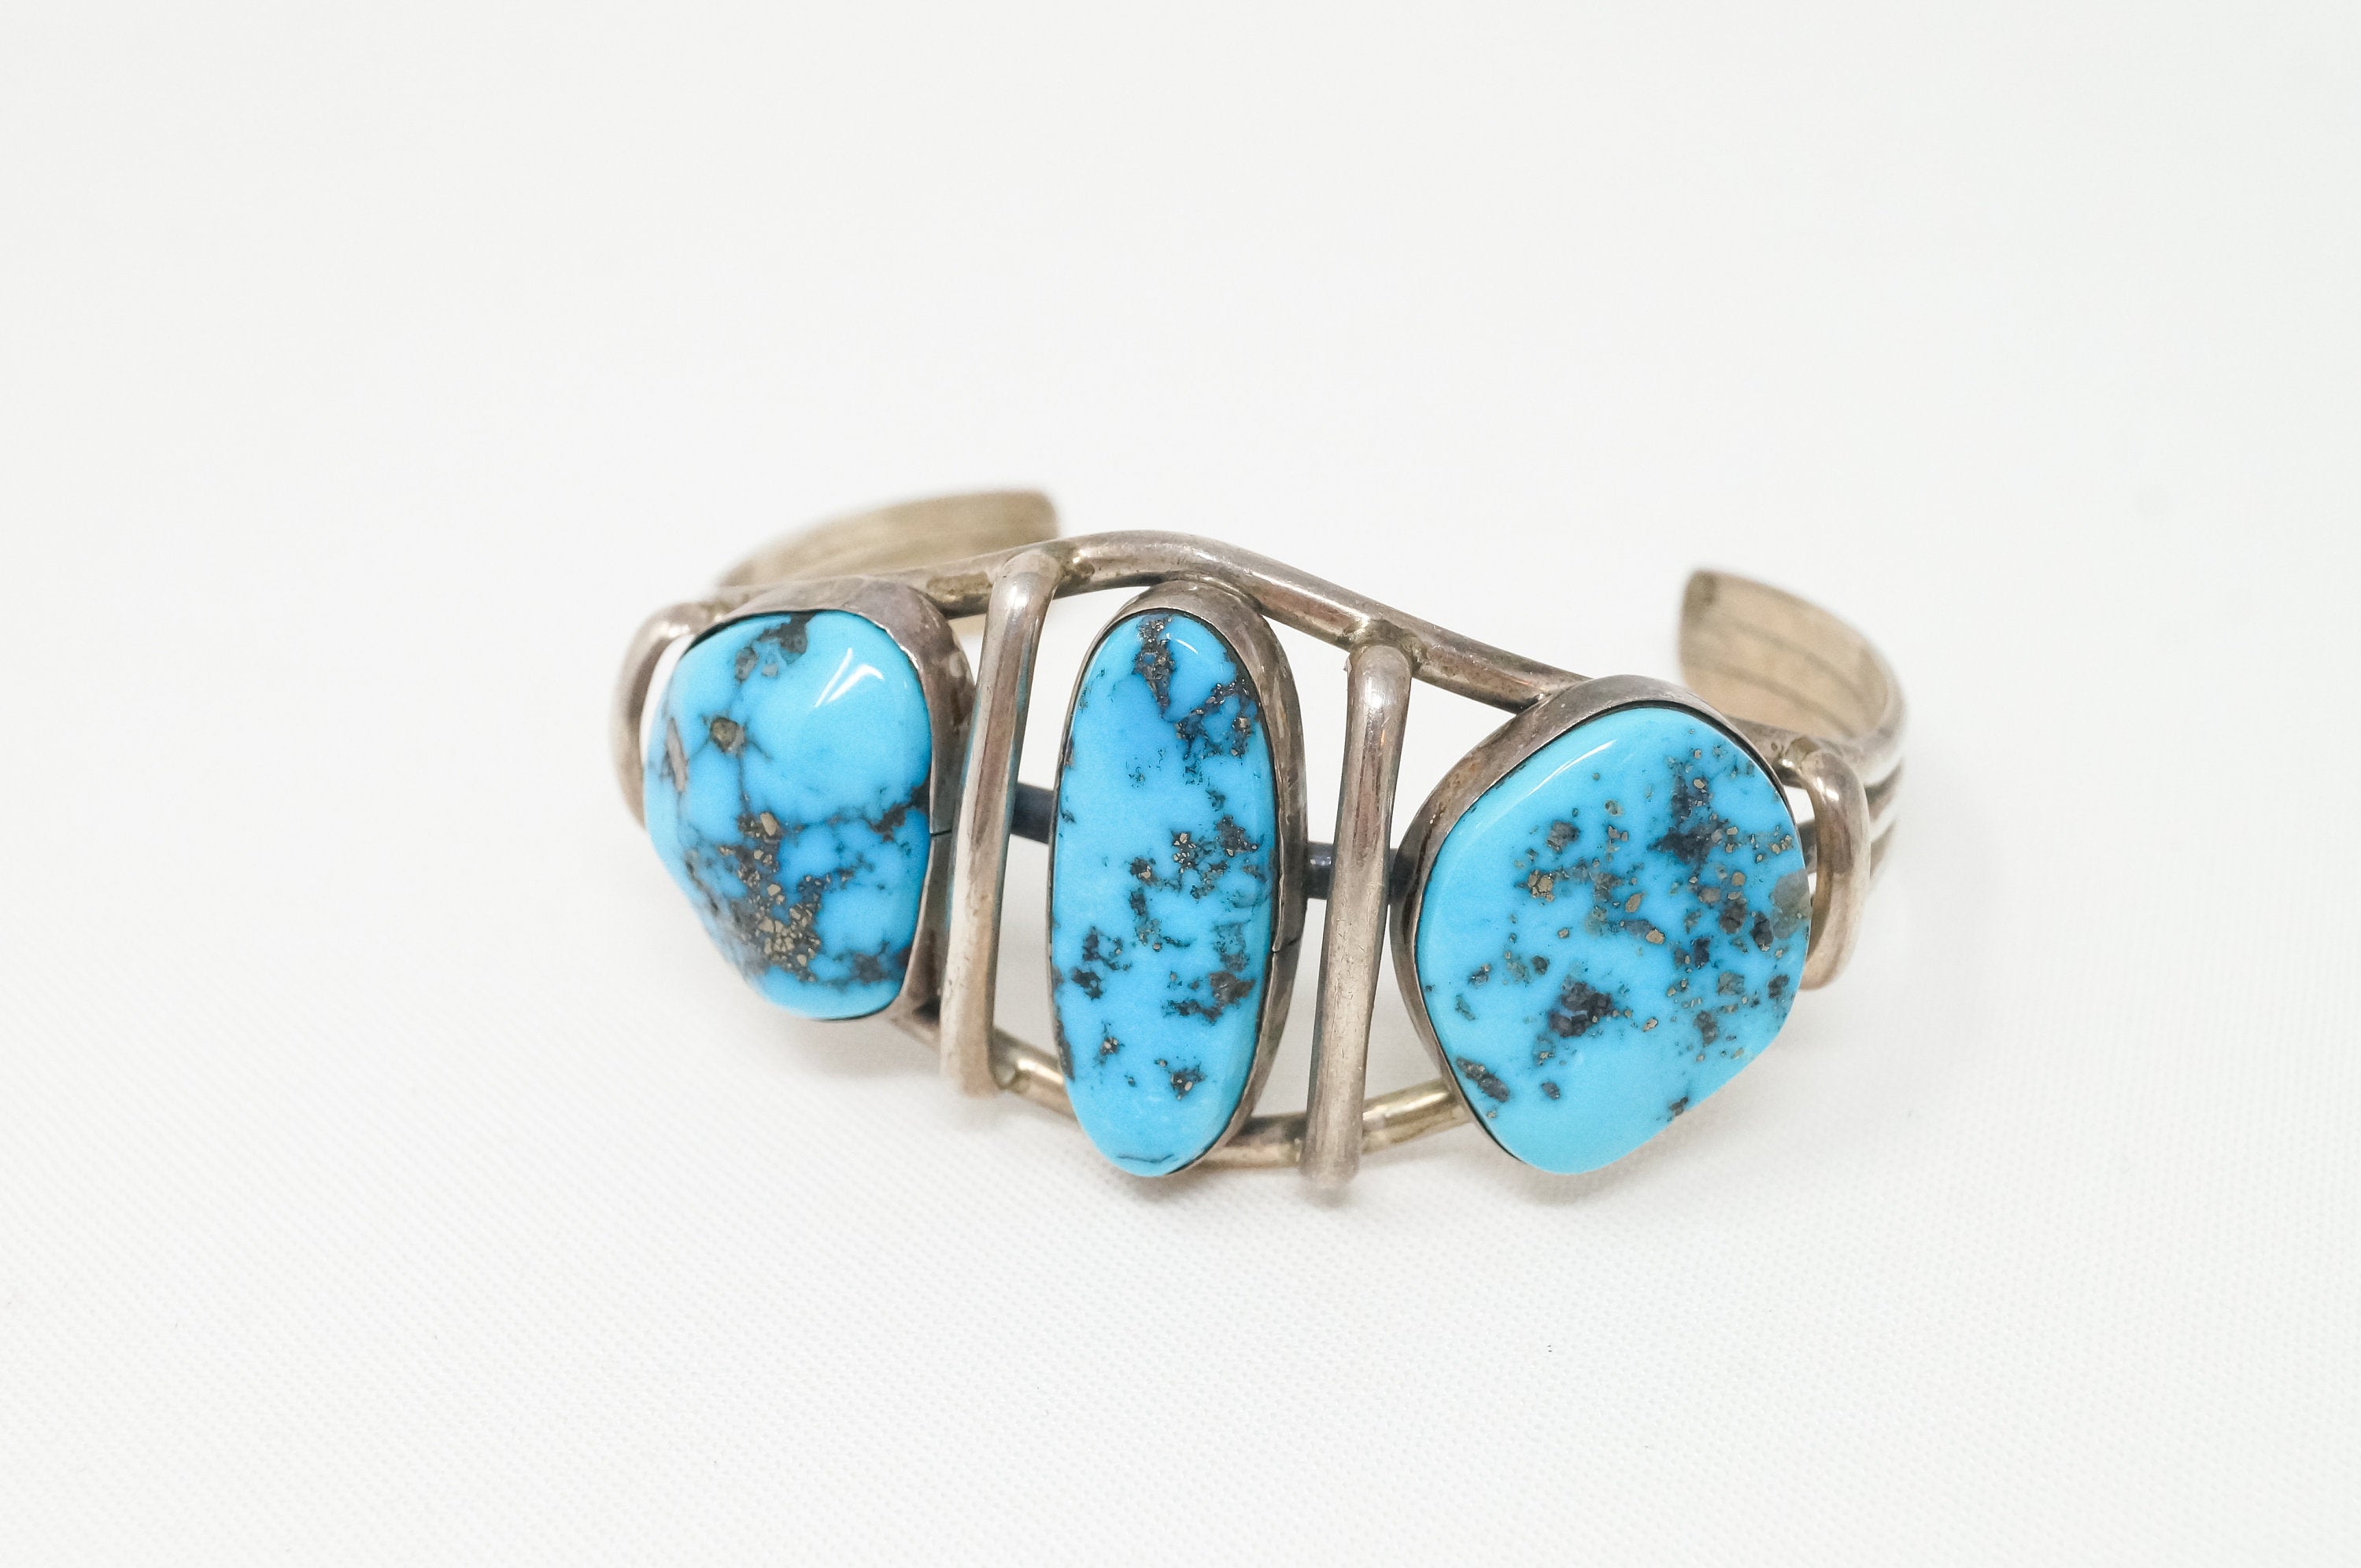 Vintage Native American Signed Turquoise Sterling Silver Cuff Bracelet